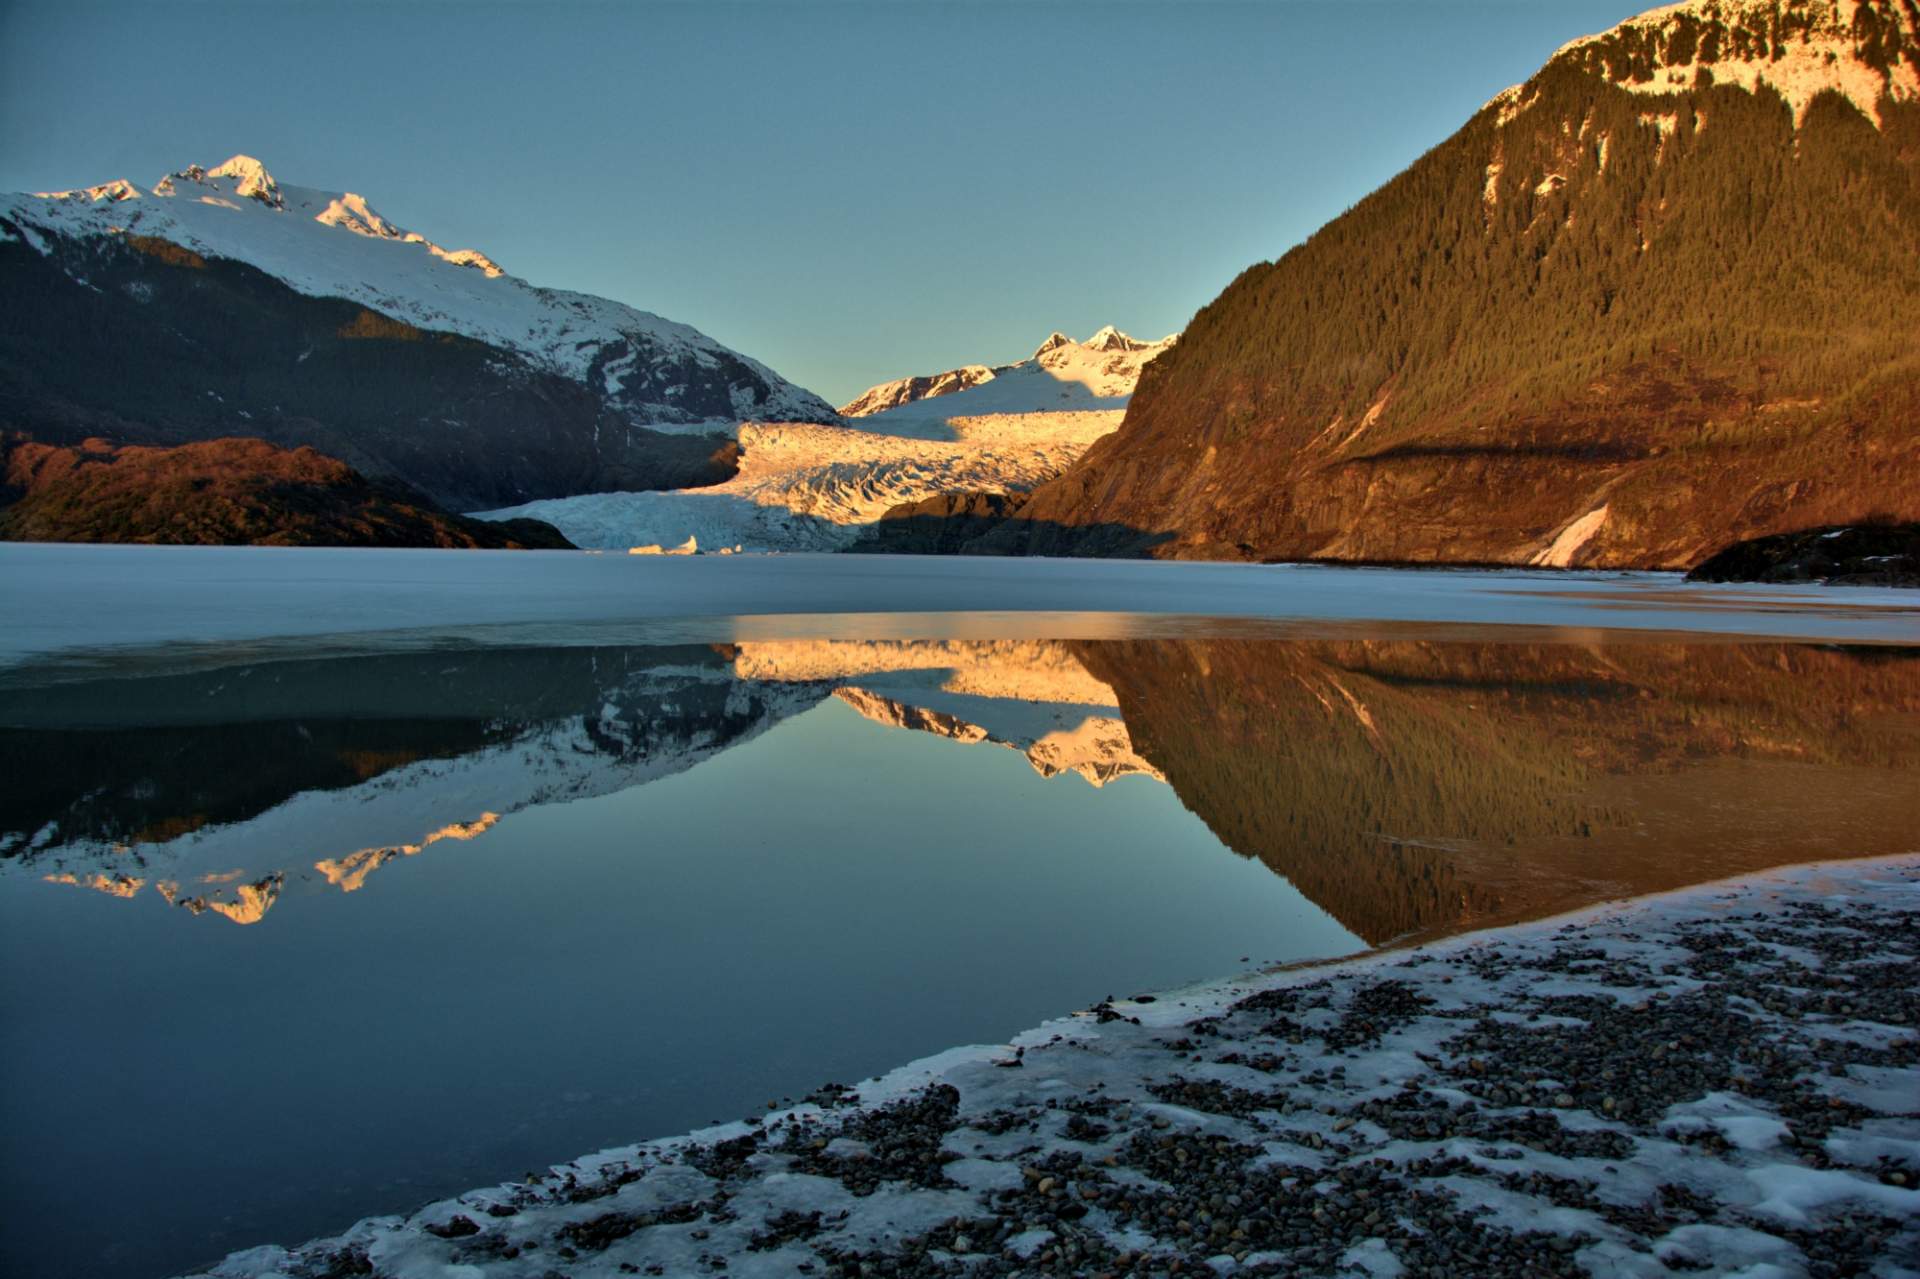 Mendenhall Glacier with an alpine glow and reflecting on the water